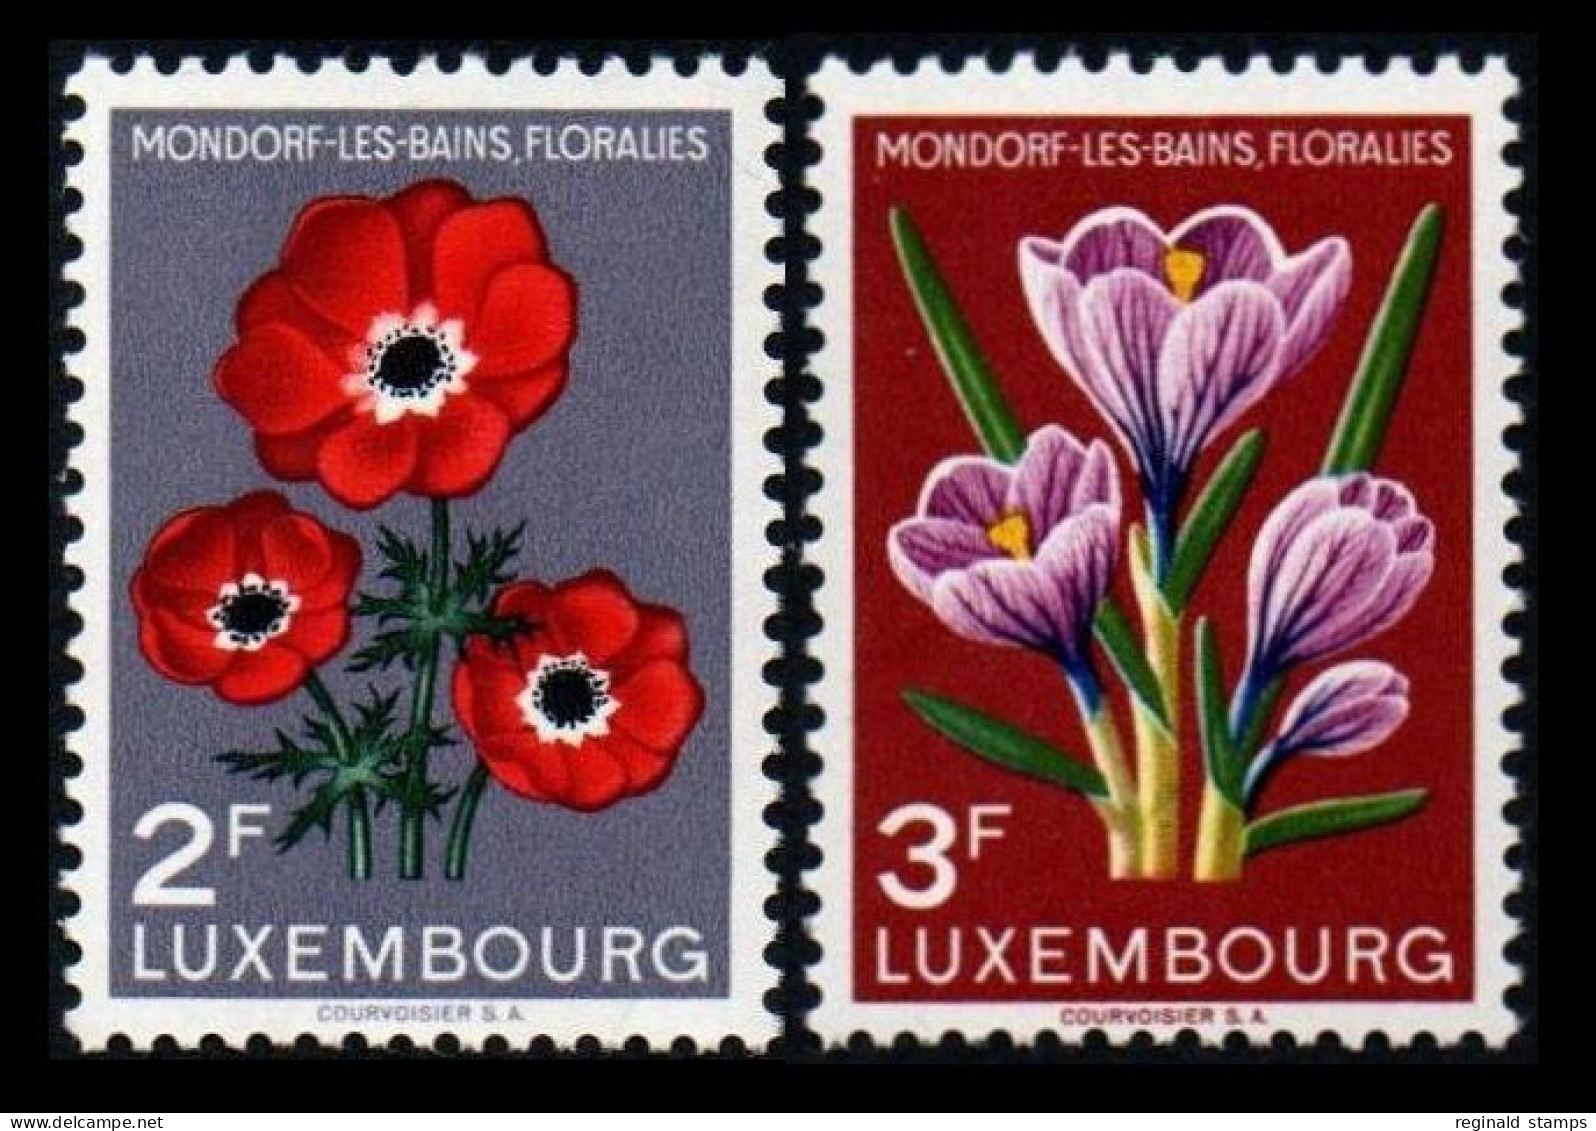 Luxembourg 1956 Monforf-Les-Bains Flower Festival, MNH ** Mi 547/48 (Ref: 1152) - Unused Stamps